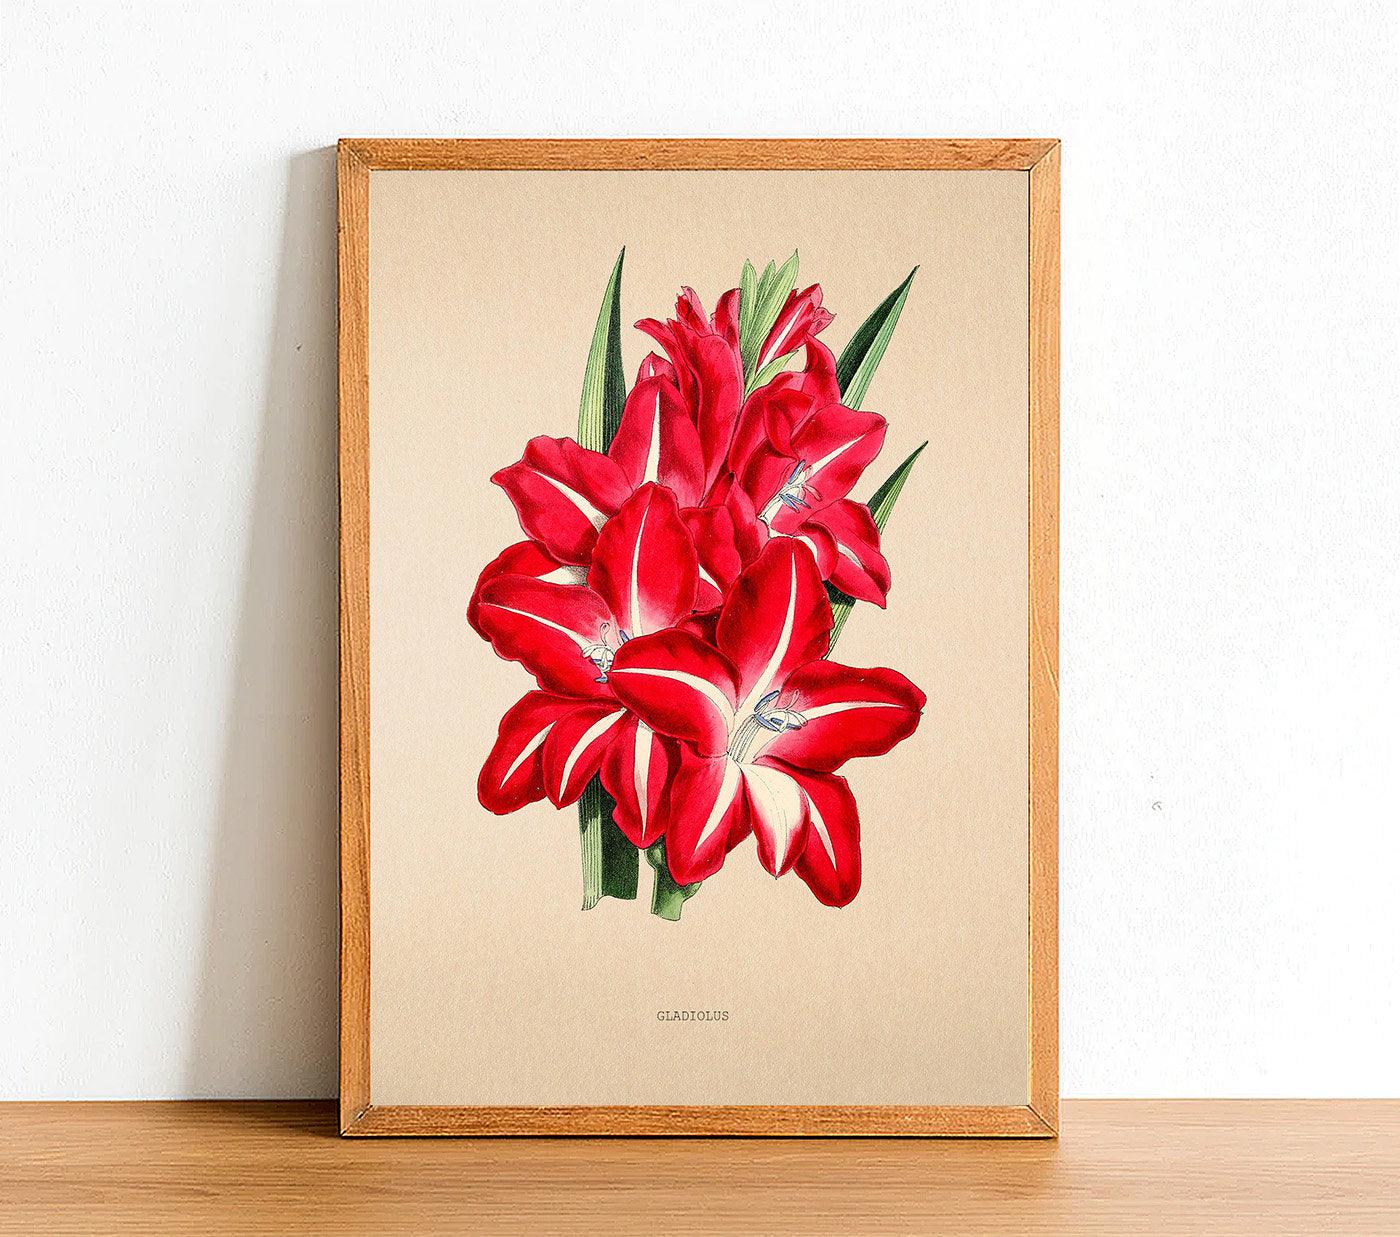 Gladiolus - Antique Flower Poster - Classic Posters